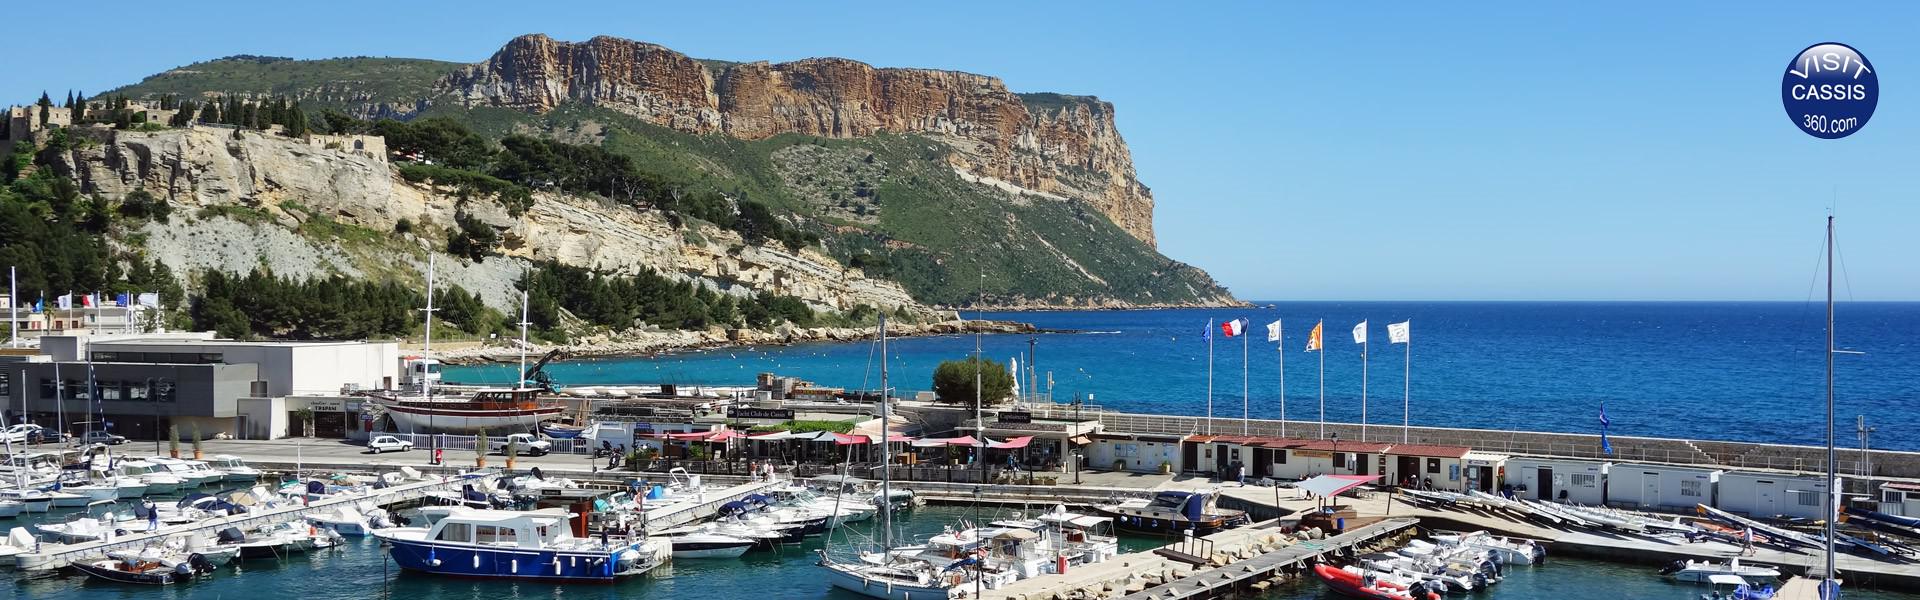 Town of Cassis